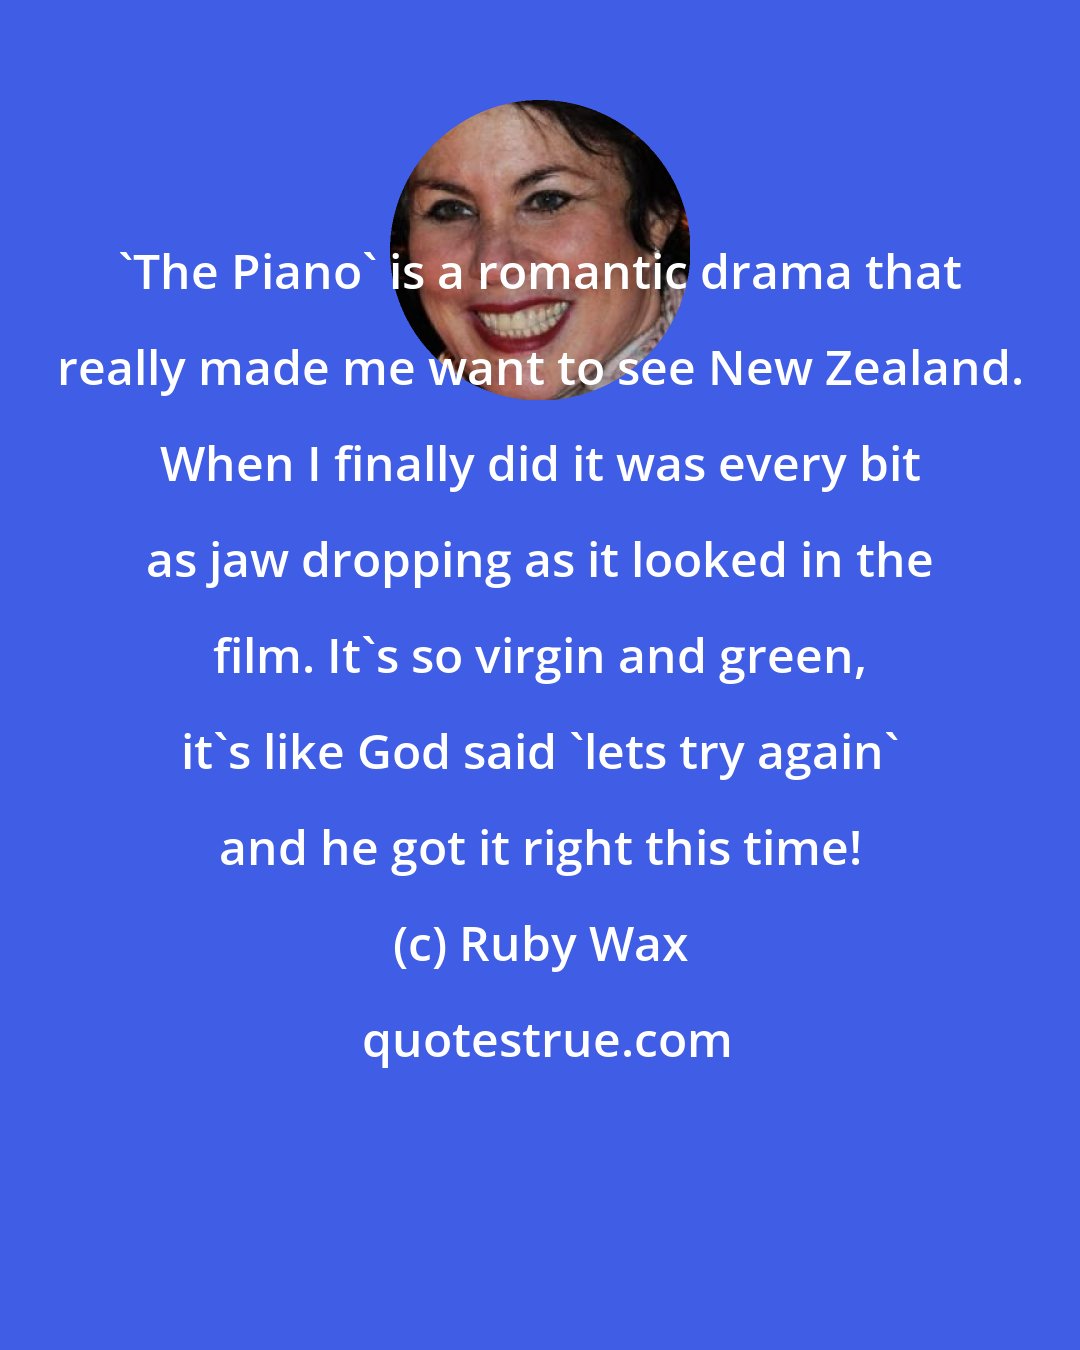 Ruby Wax: 'The Piano' is a romantic drama that really made me want to see New Zealand. When I finally did it was every bit as jaw dropping as it looked in the film. It's so virgin and green, it's like God said 'lets try again' and he got it right this time!